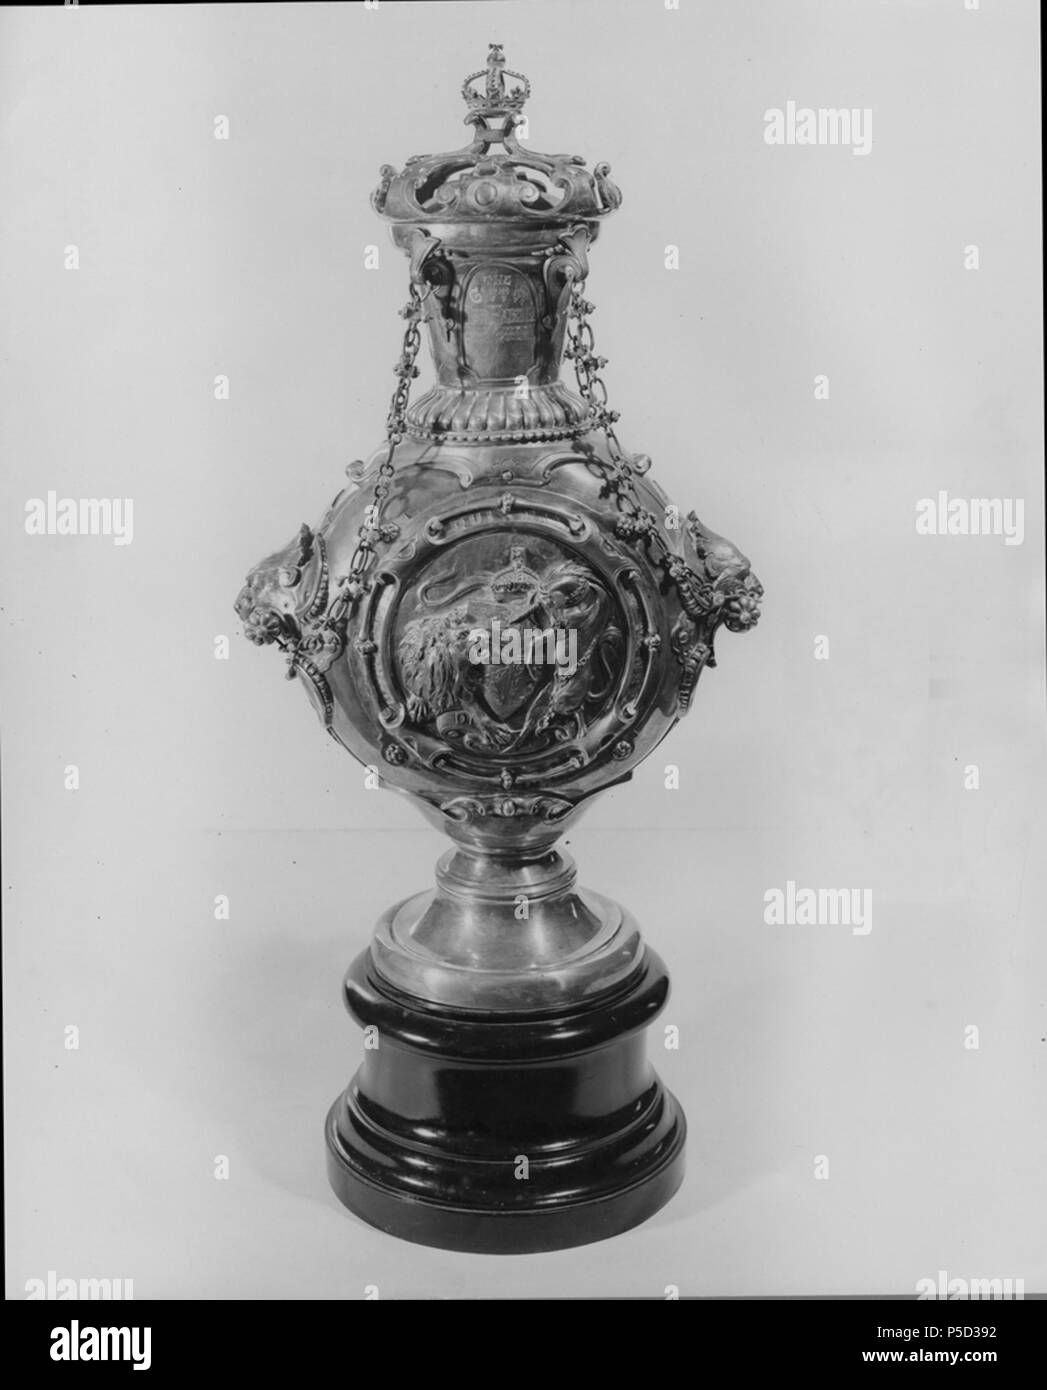 N/A. English: The silver chistening cup given to Prince Albert Edward Kamehameha by Queen Victoria of the United Kingdom. not given. courtesy of Meirie K. Dutton 343 Christening cup of Prince Albert Kamehameha (front) Stock Photo